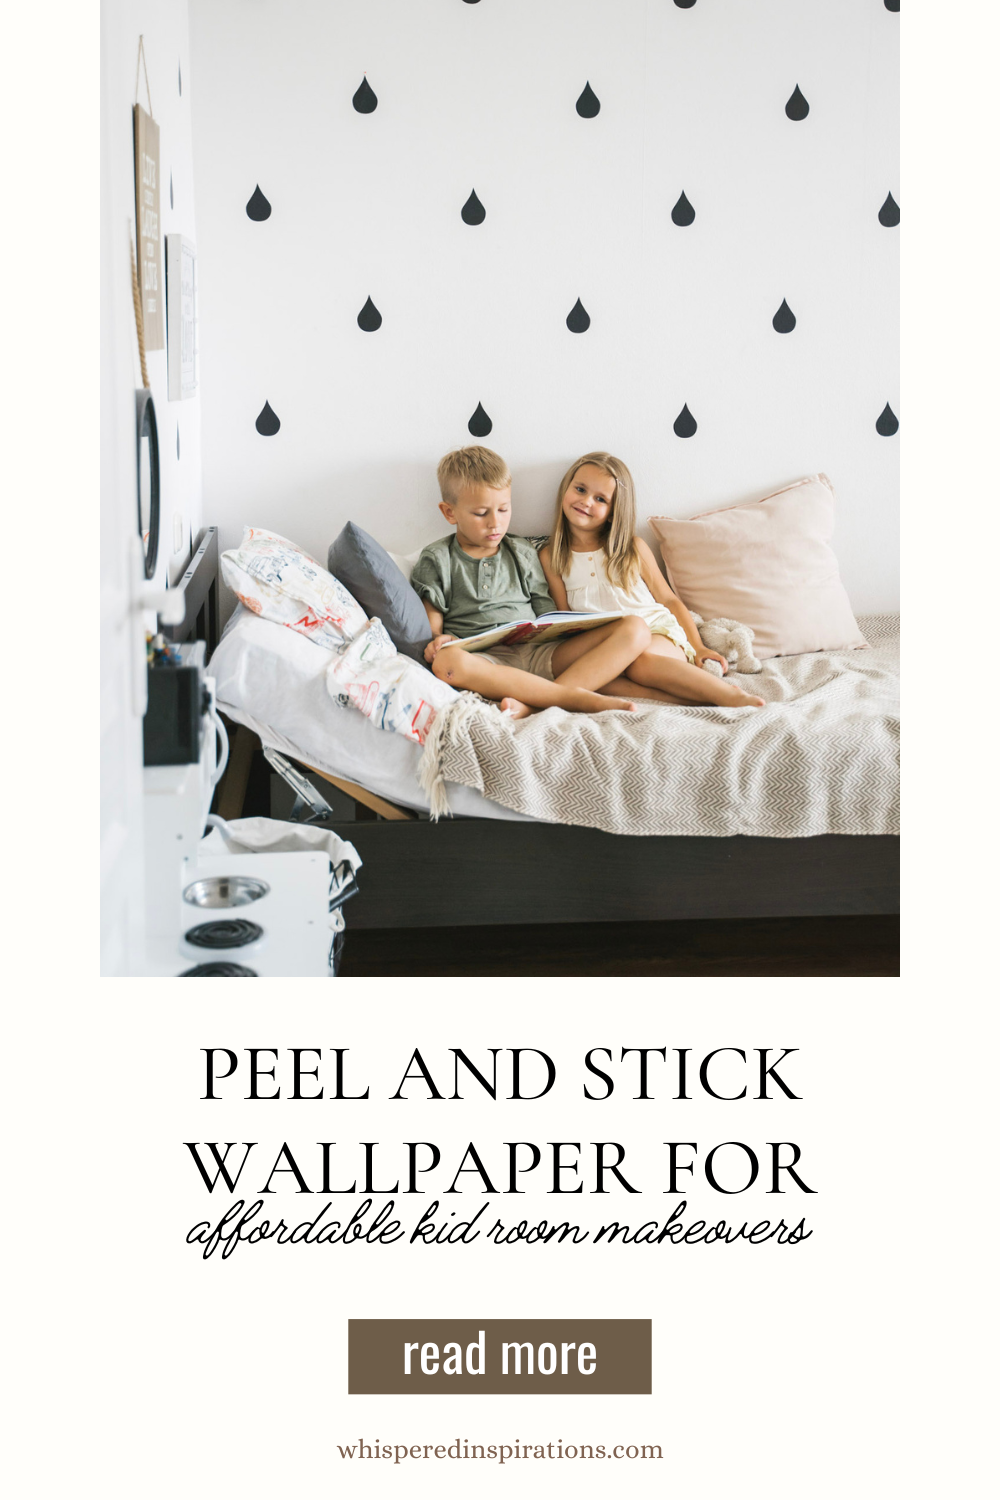 A boy and a girl read a book together on a bed. Behind them is a black and white peel and stick wallpaper. 